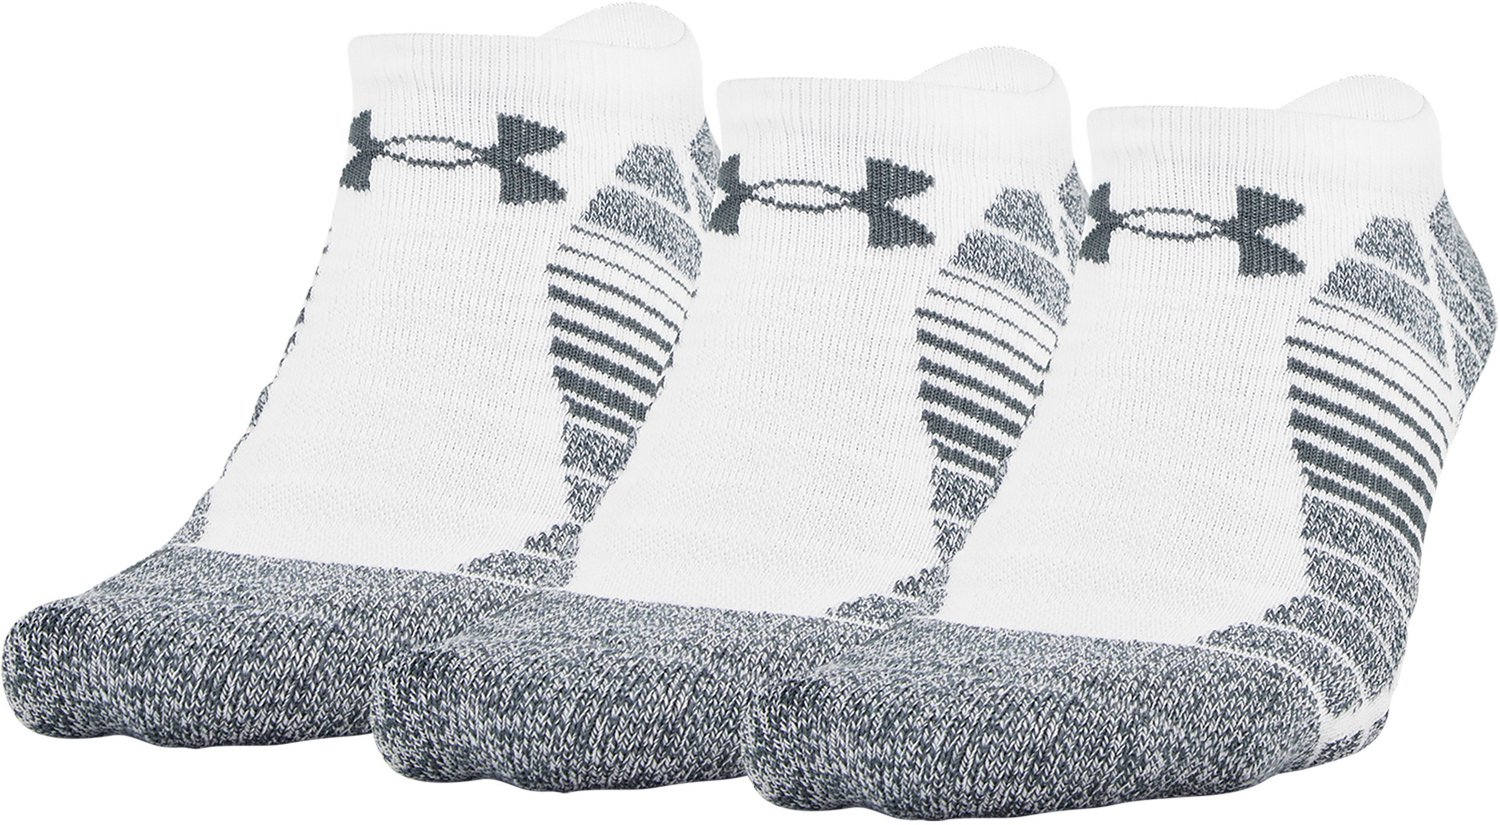 Under Armour Elevated Performance No Show Socks 3 Pack